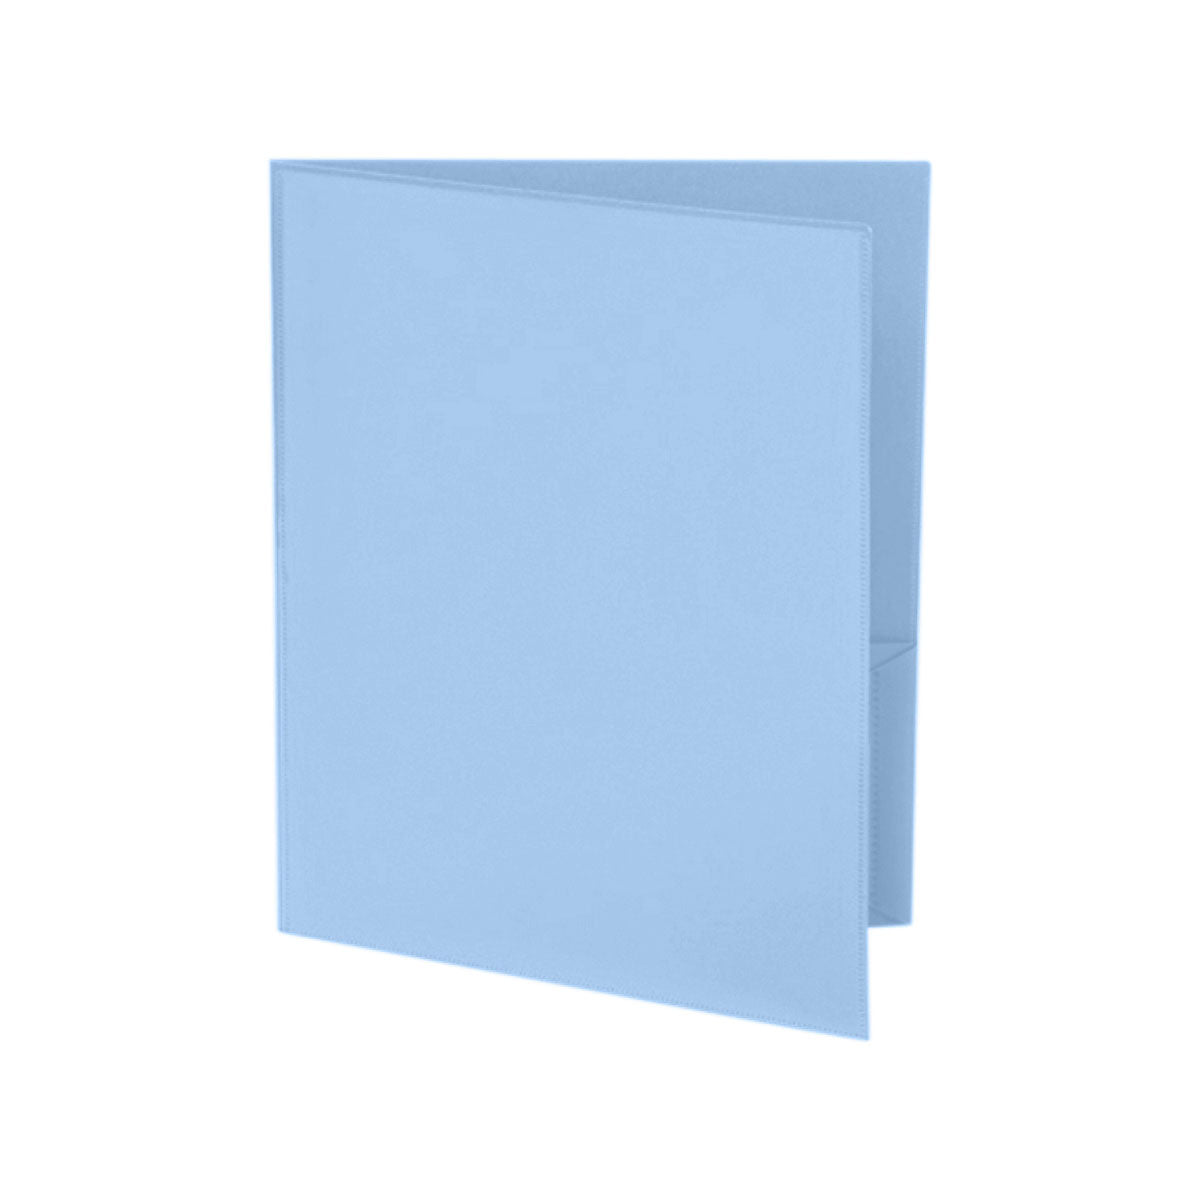 Customized Two Pocket Folder With Clear Outside Pockets | Ultra Folders